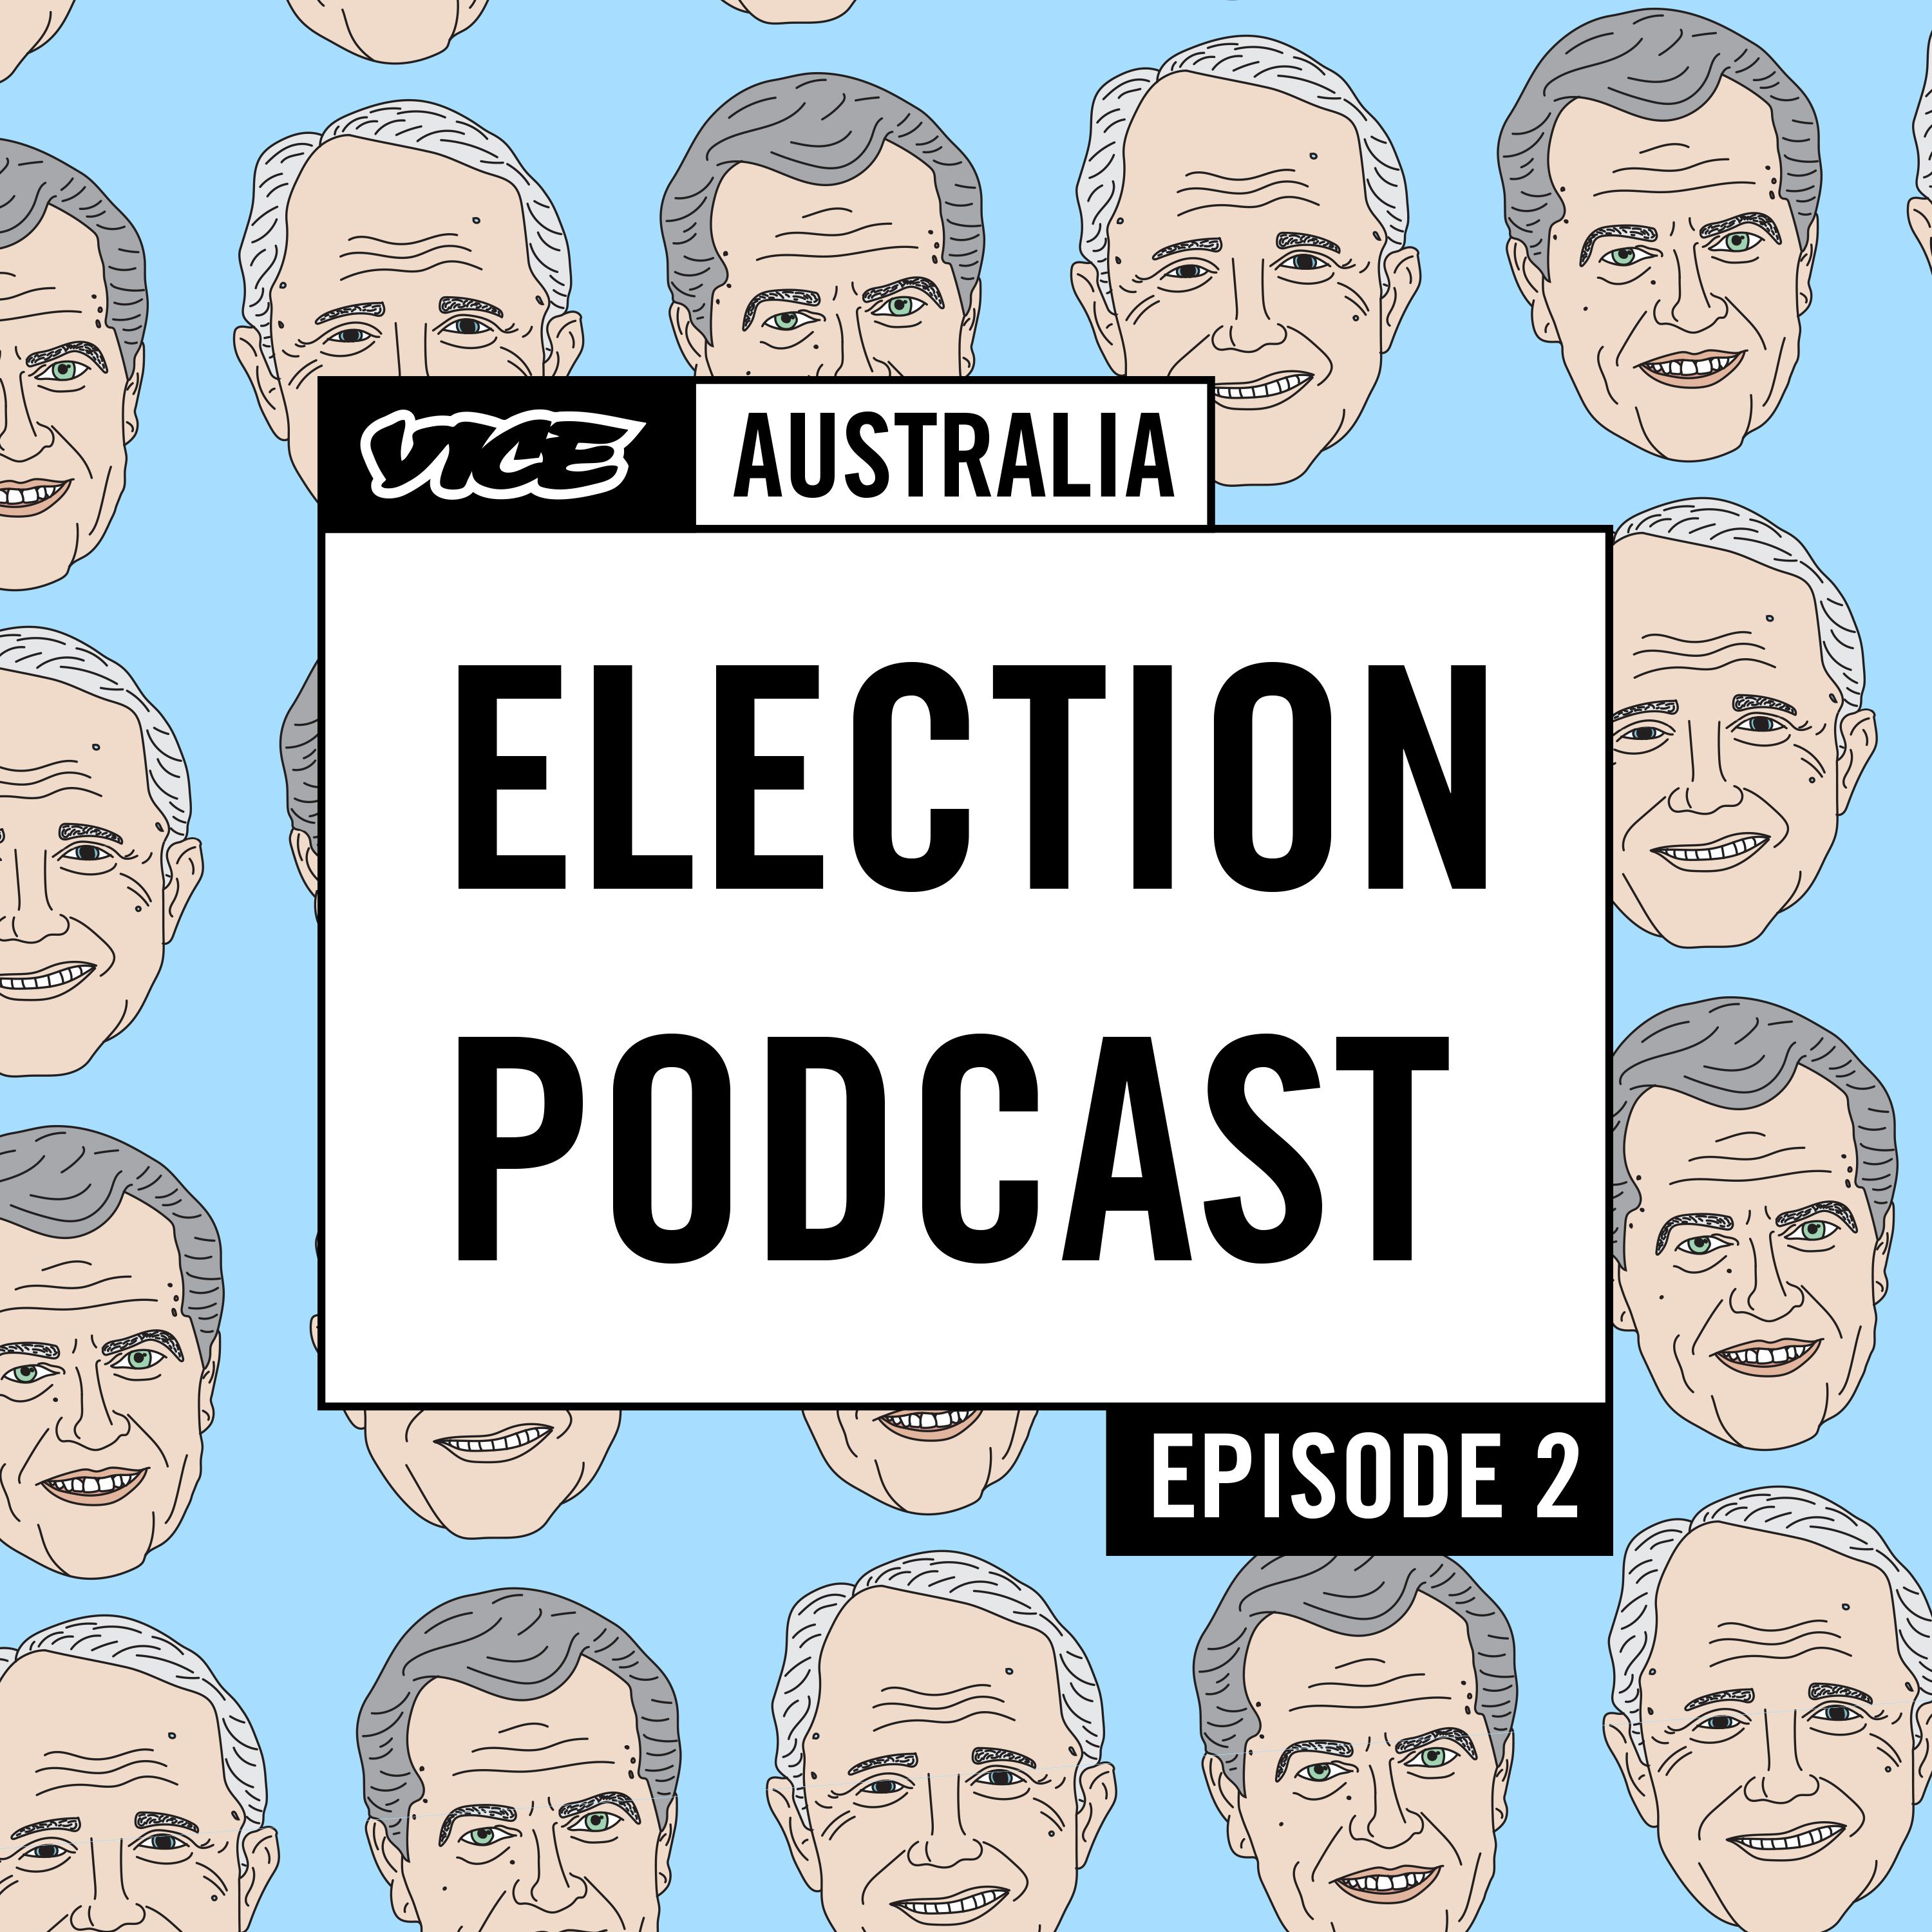 VICE Election Podcast - Episode 2 (with Aamer Rahman)